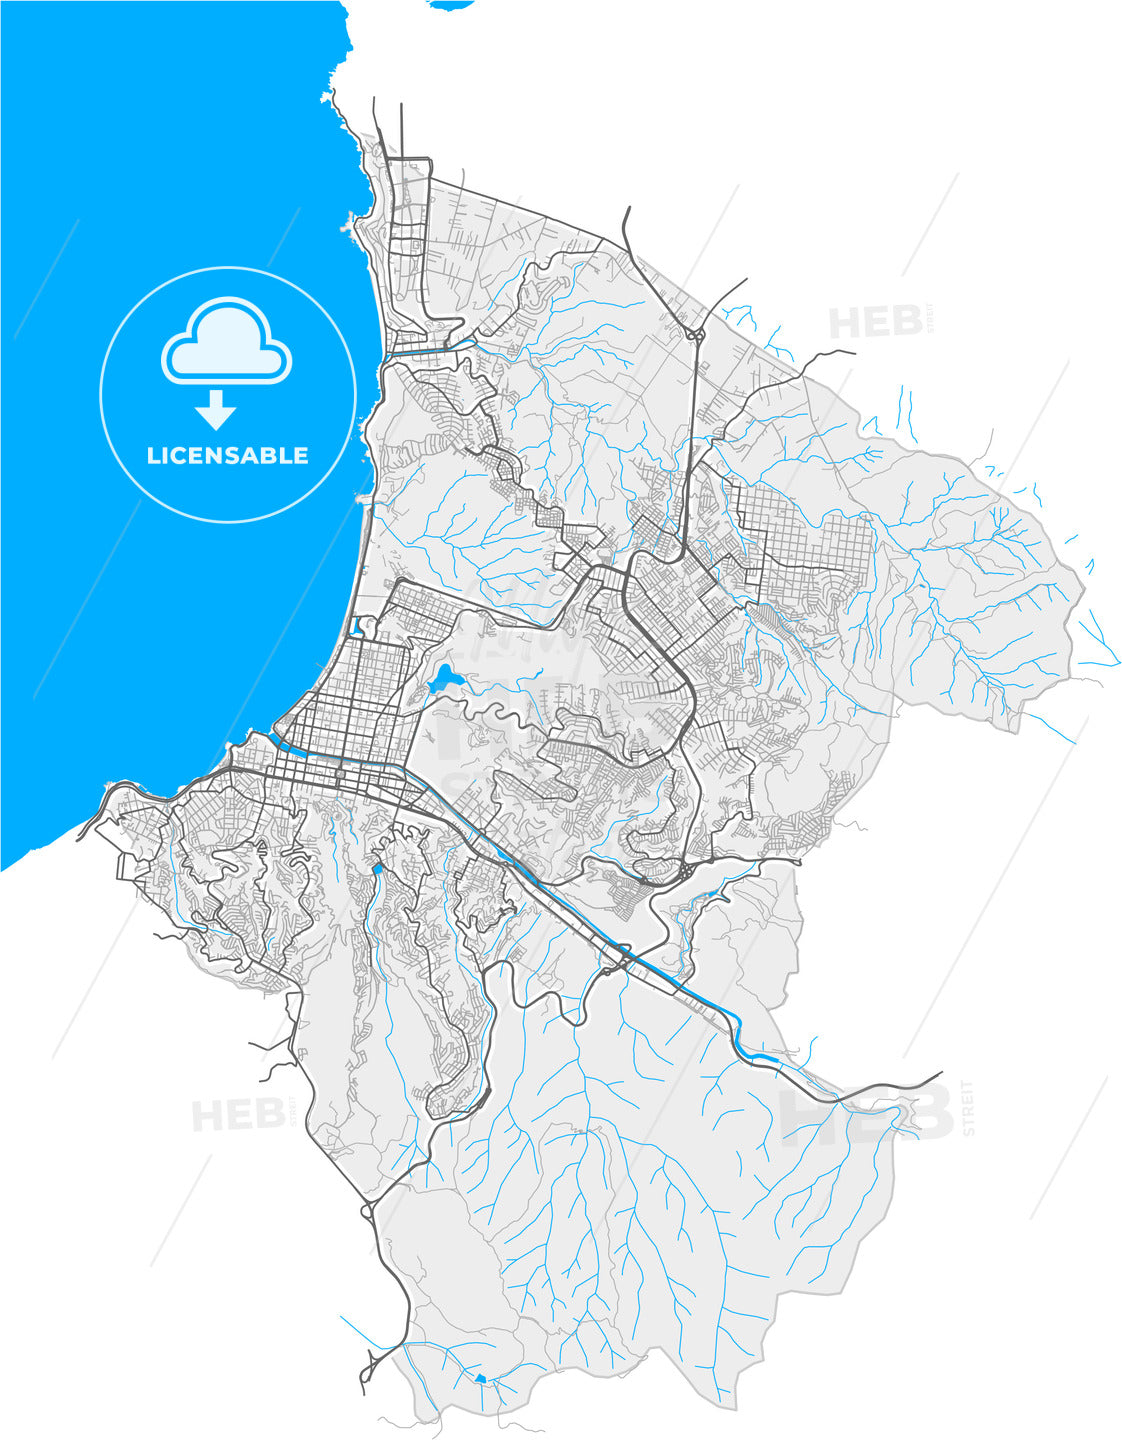 Vina del Mar, Chile, high quality vector map